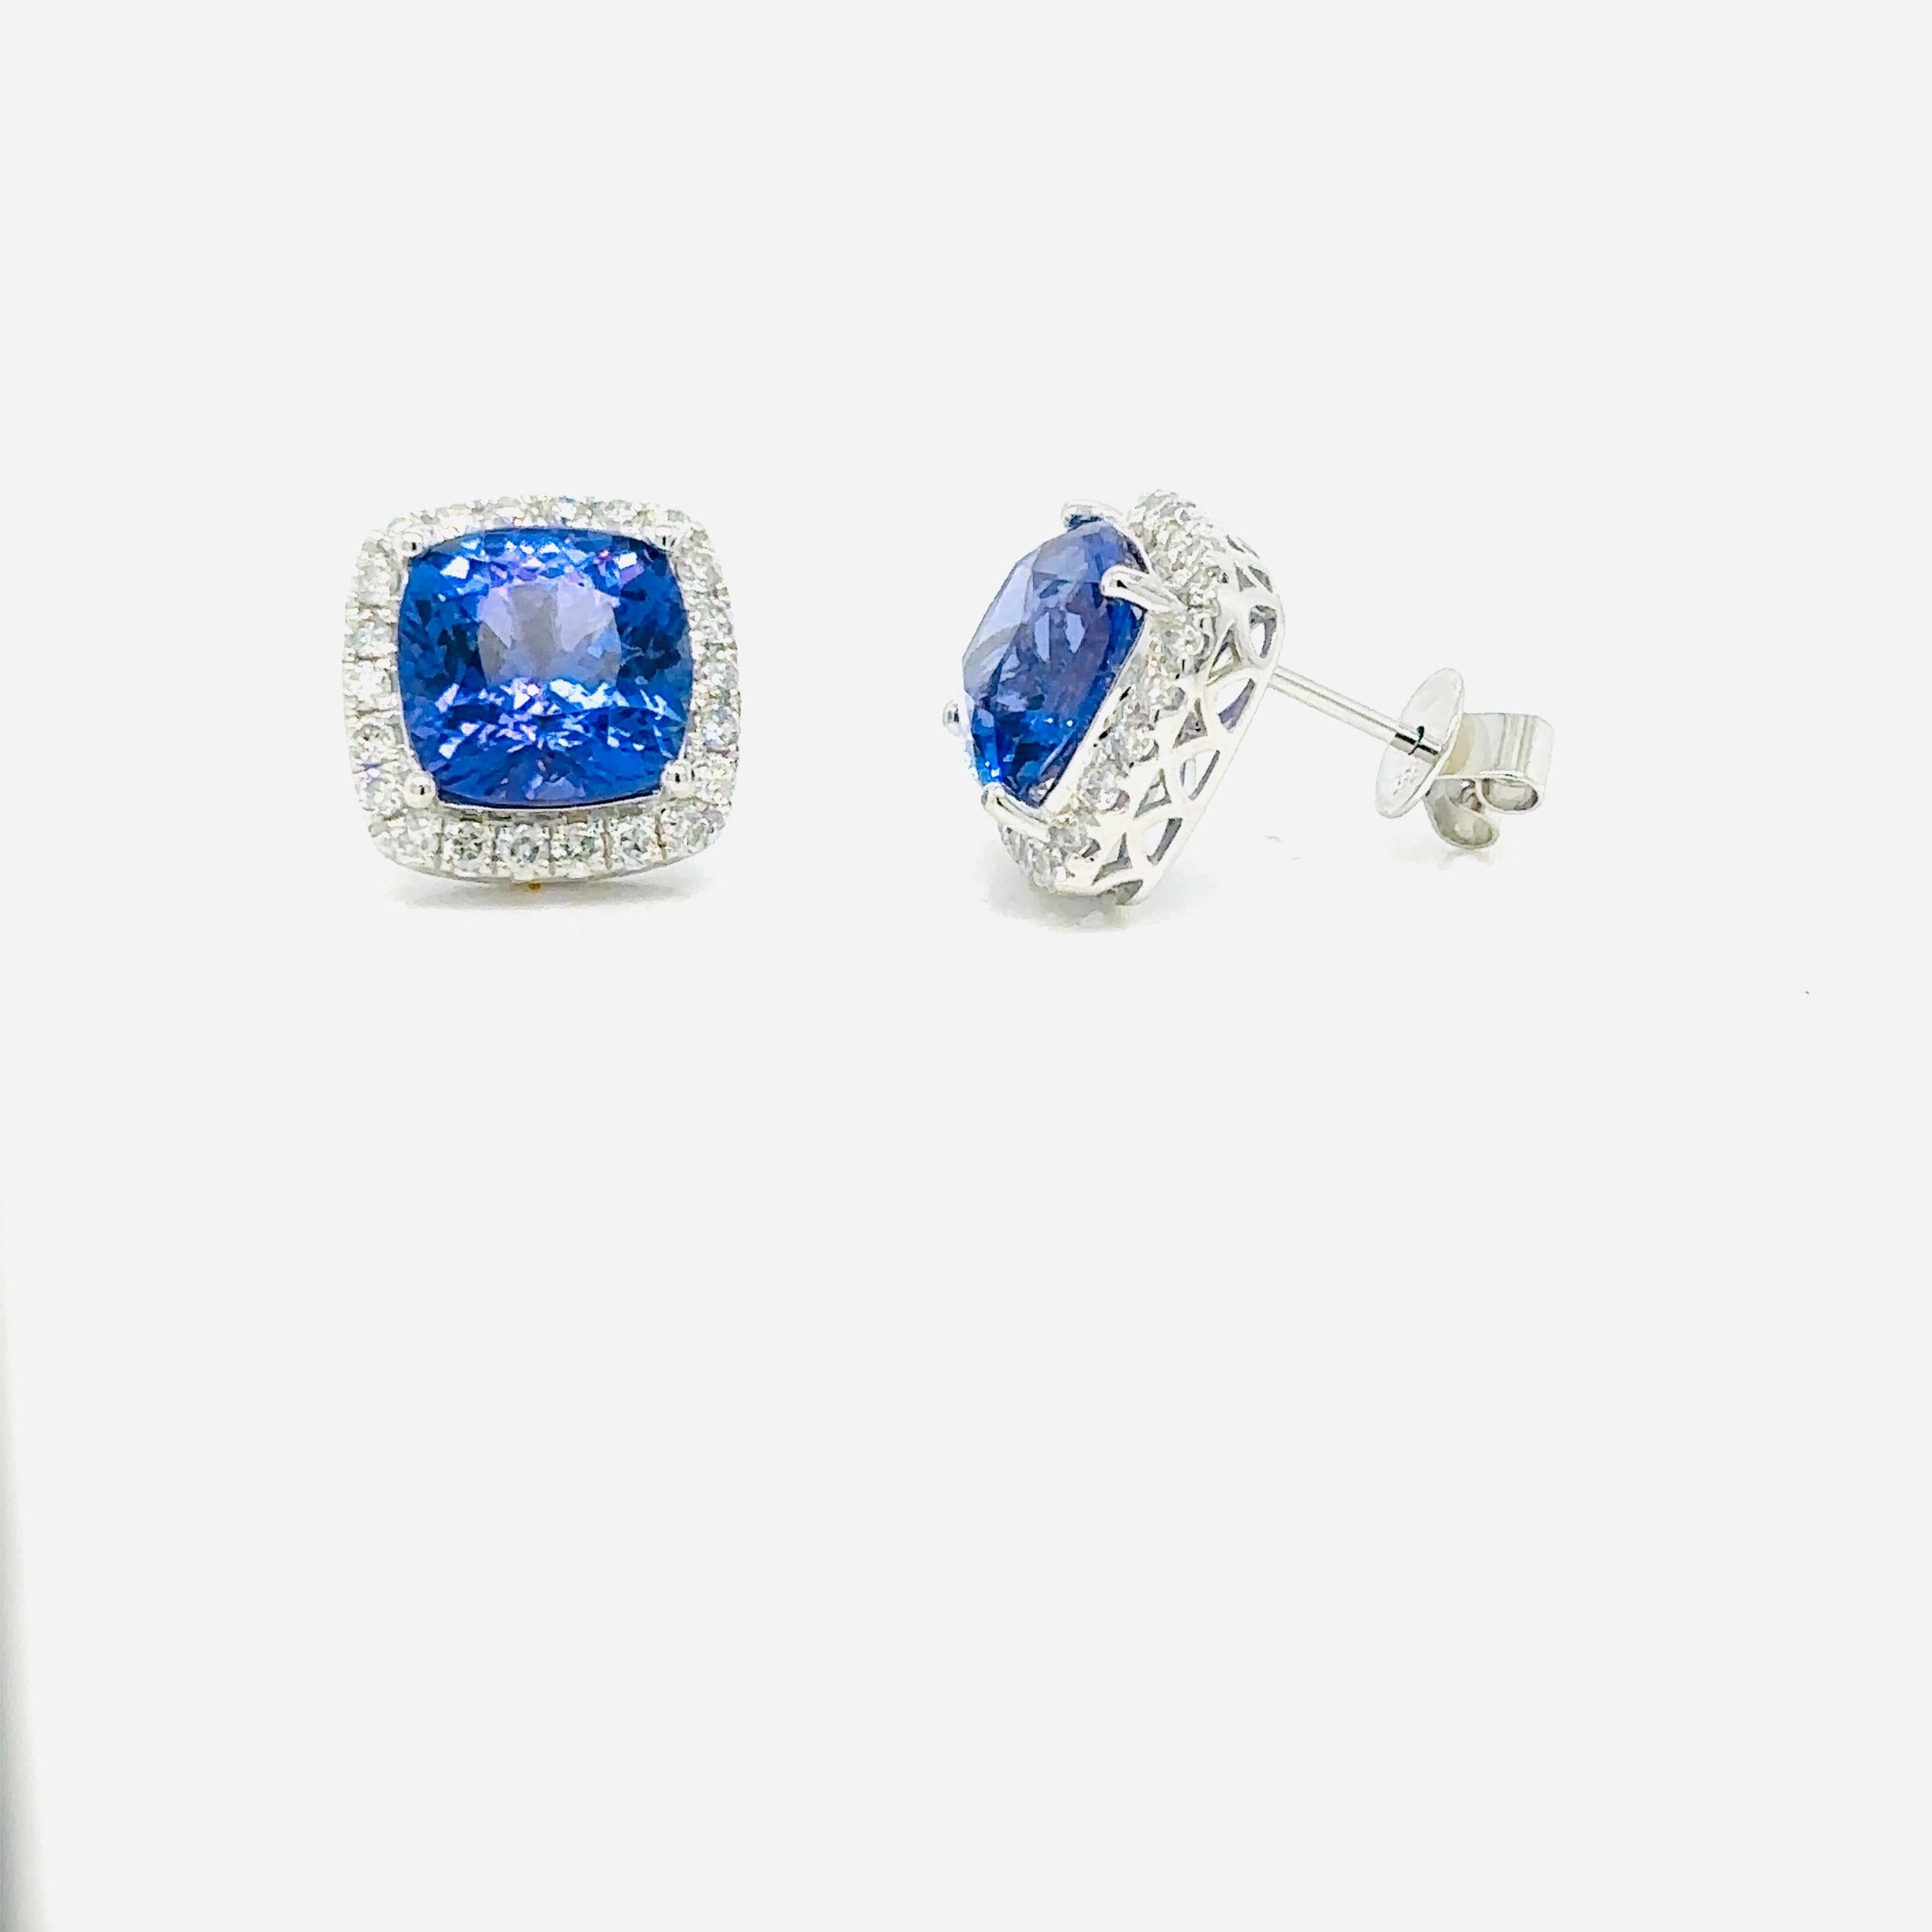 Elegant Tanzanite earrings in Cushion shape bounded by Round diamonds at all sides and corners.

Secure Yours Today: Limited stock available. Don't miss the chance to secure your Tanzanite Diamond Earrings today. It's not just an earring; it's a way